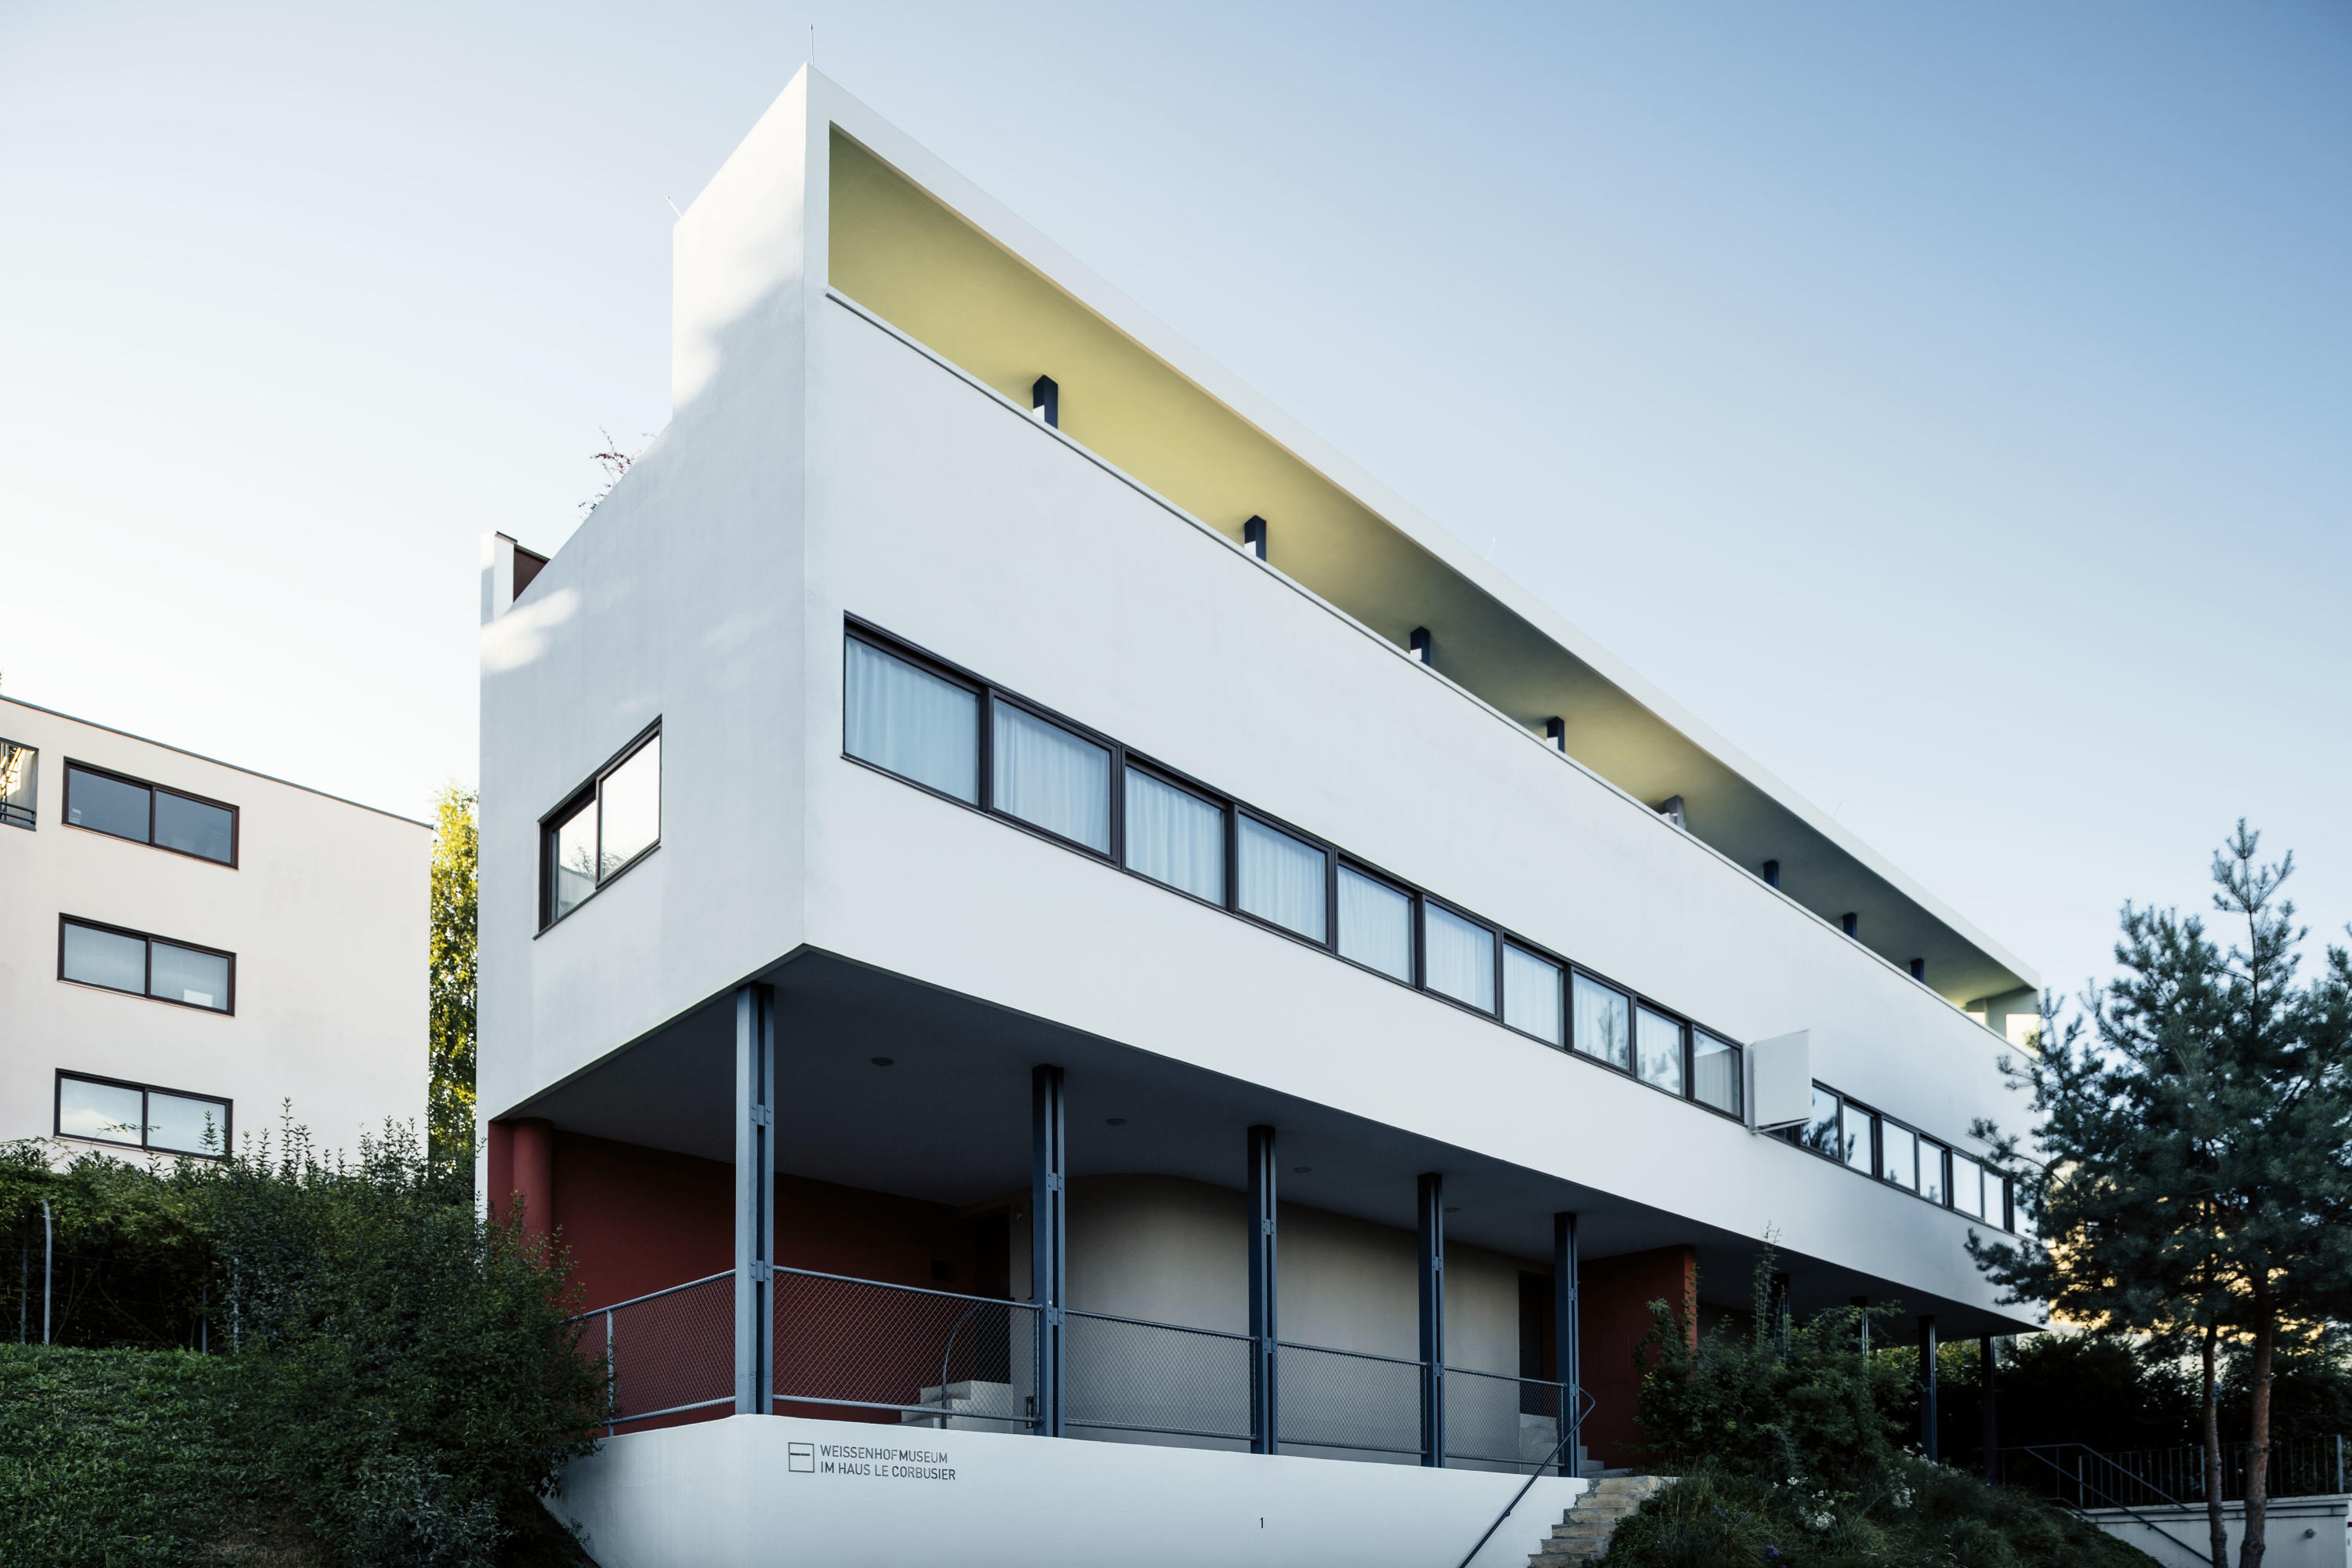 Back to the future: 100 years of the Bauhaus